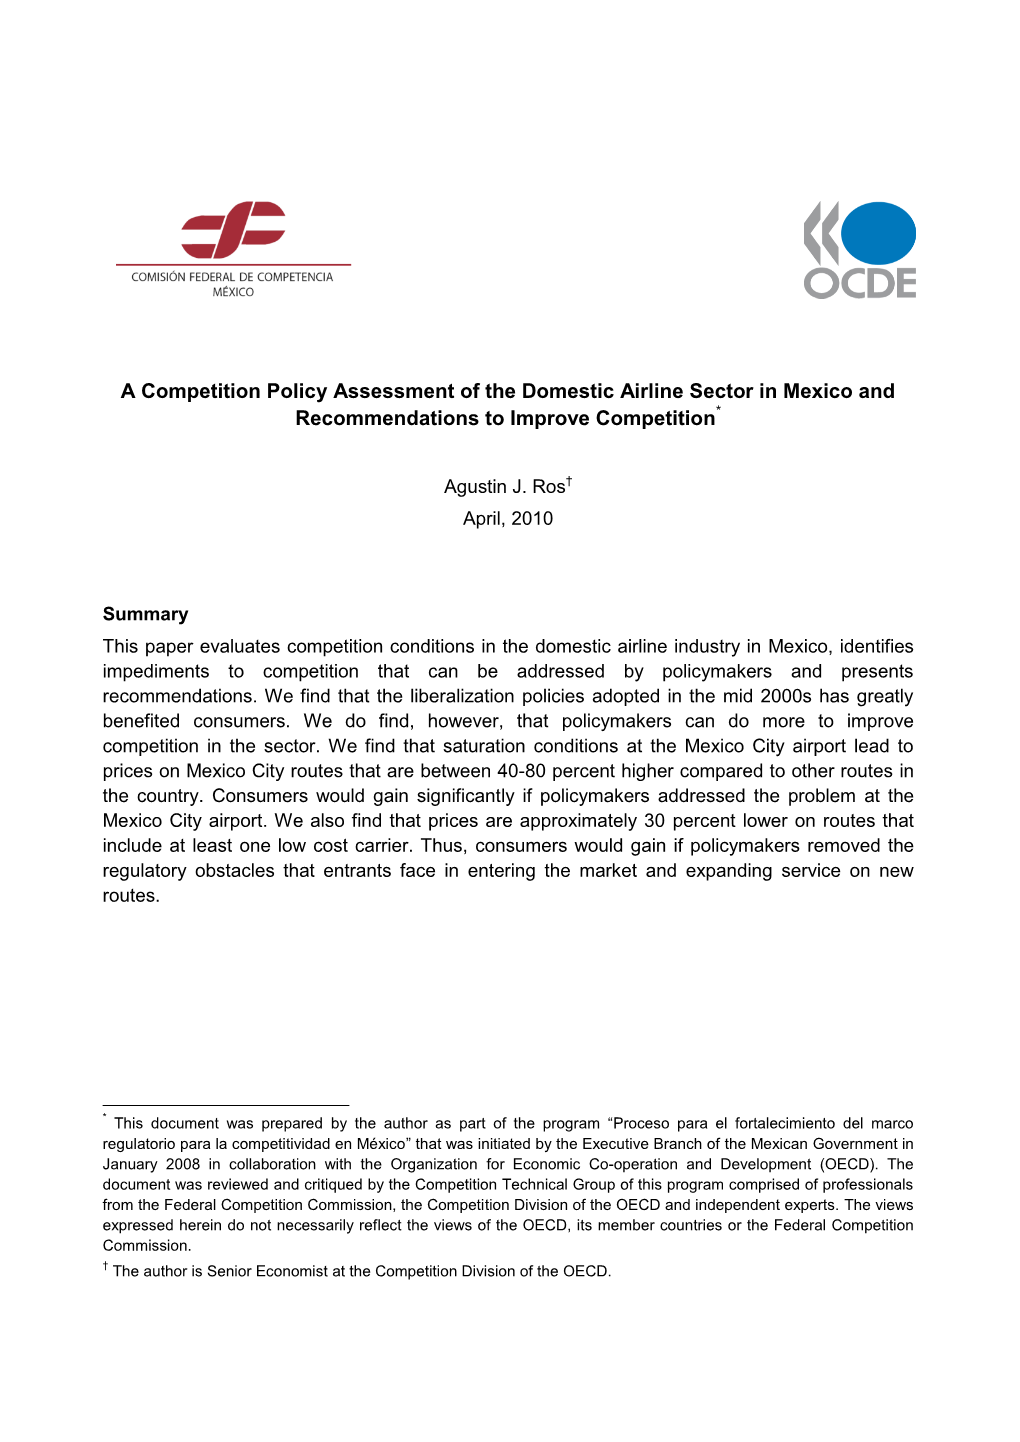 A Competition Policy Assessment of the Domestic Airline Sector in Mexico and Recommendations to Improve Competition*